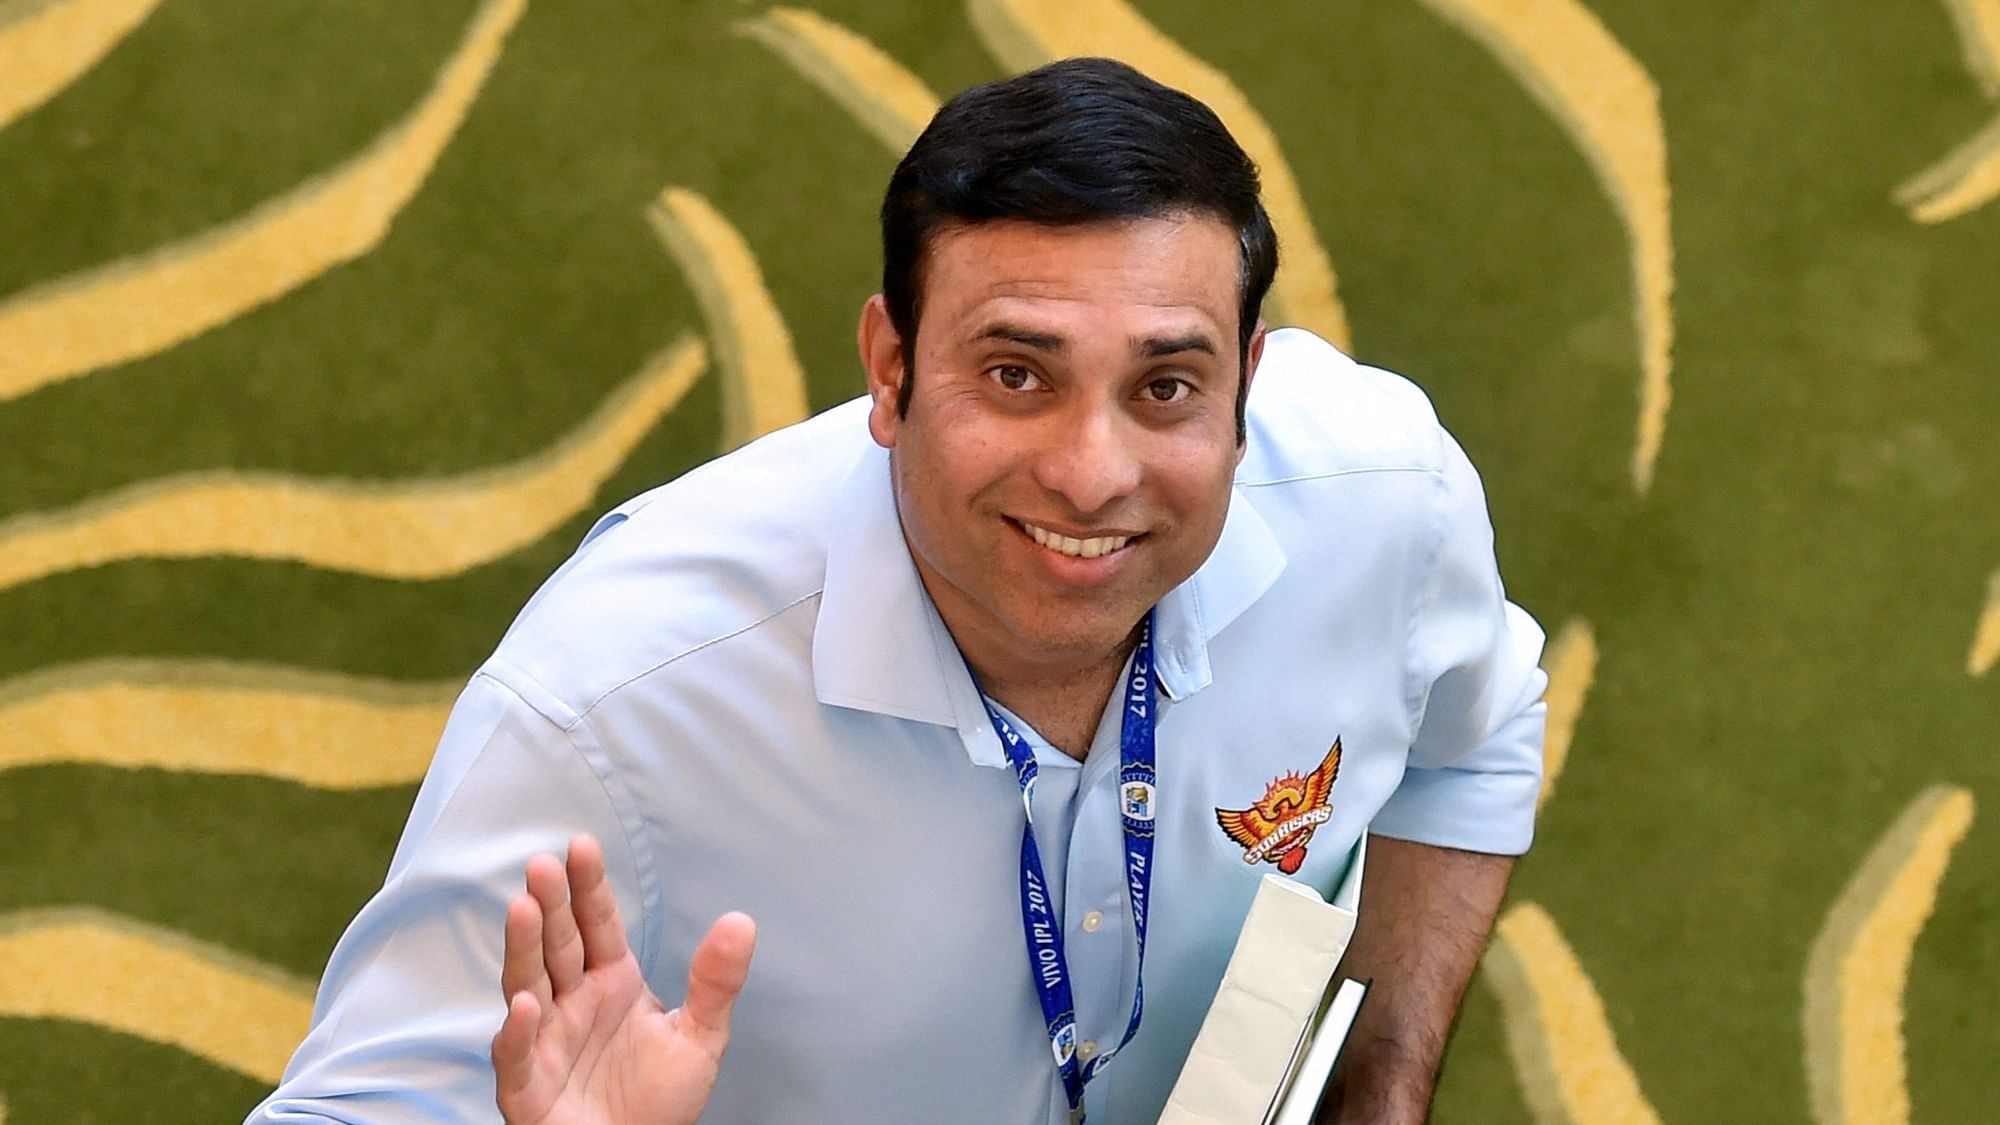 VVS Laxman wants Rohit Sharma to stick to his natural game in his new role as the opener during the upcoming South Africa Test series.